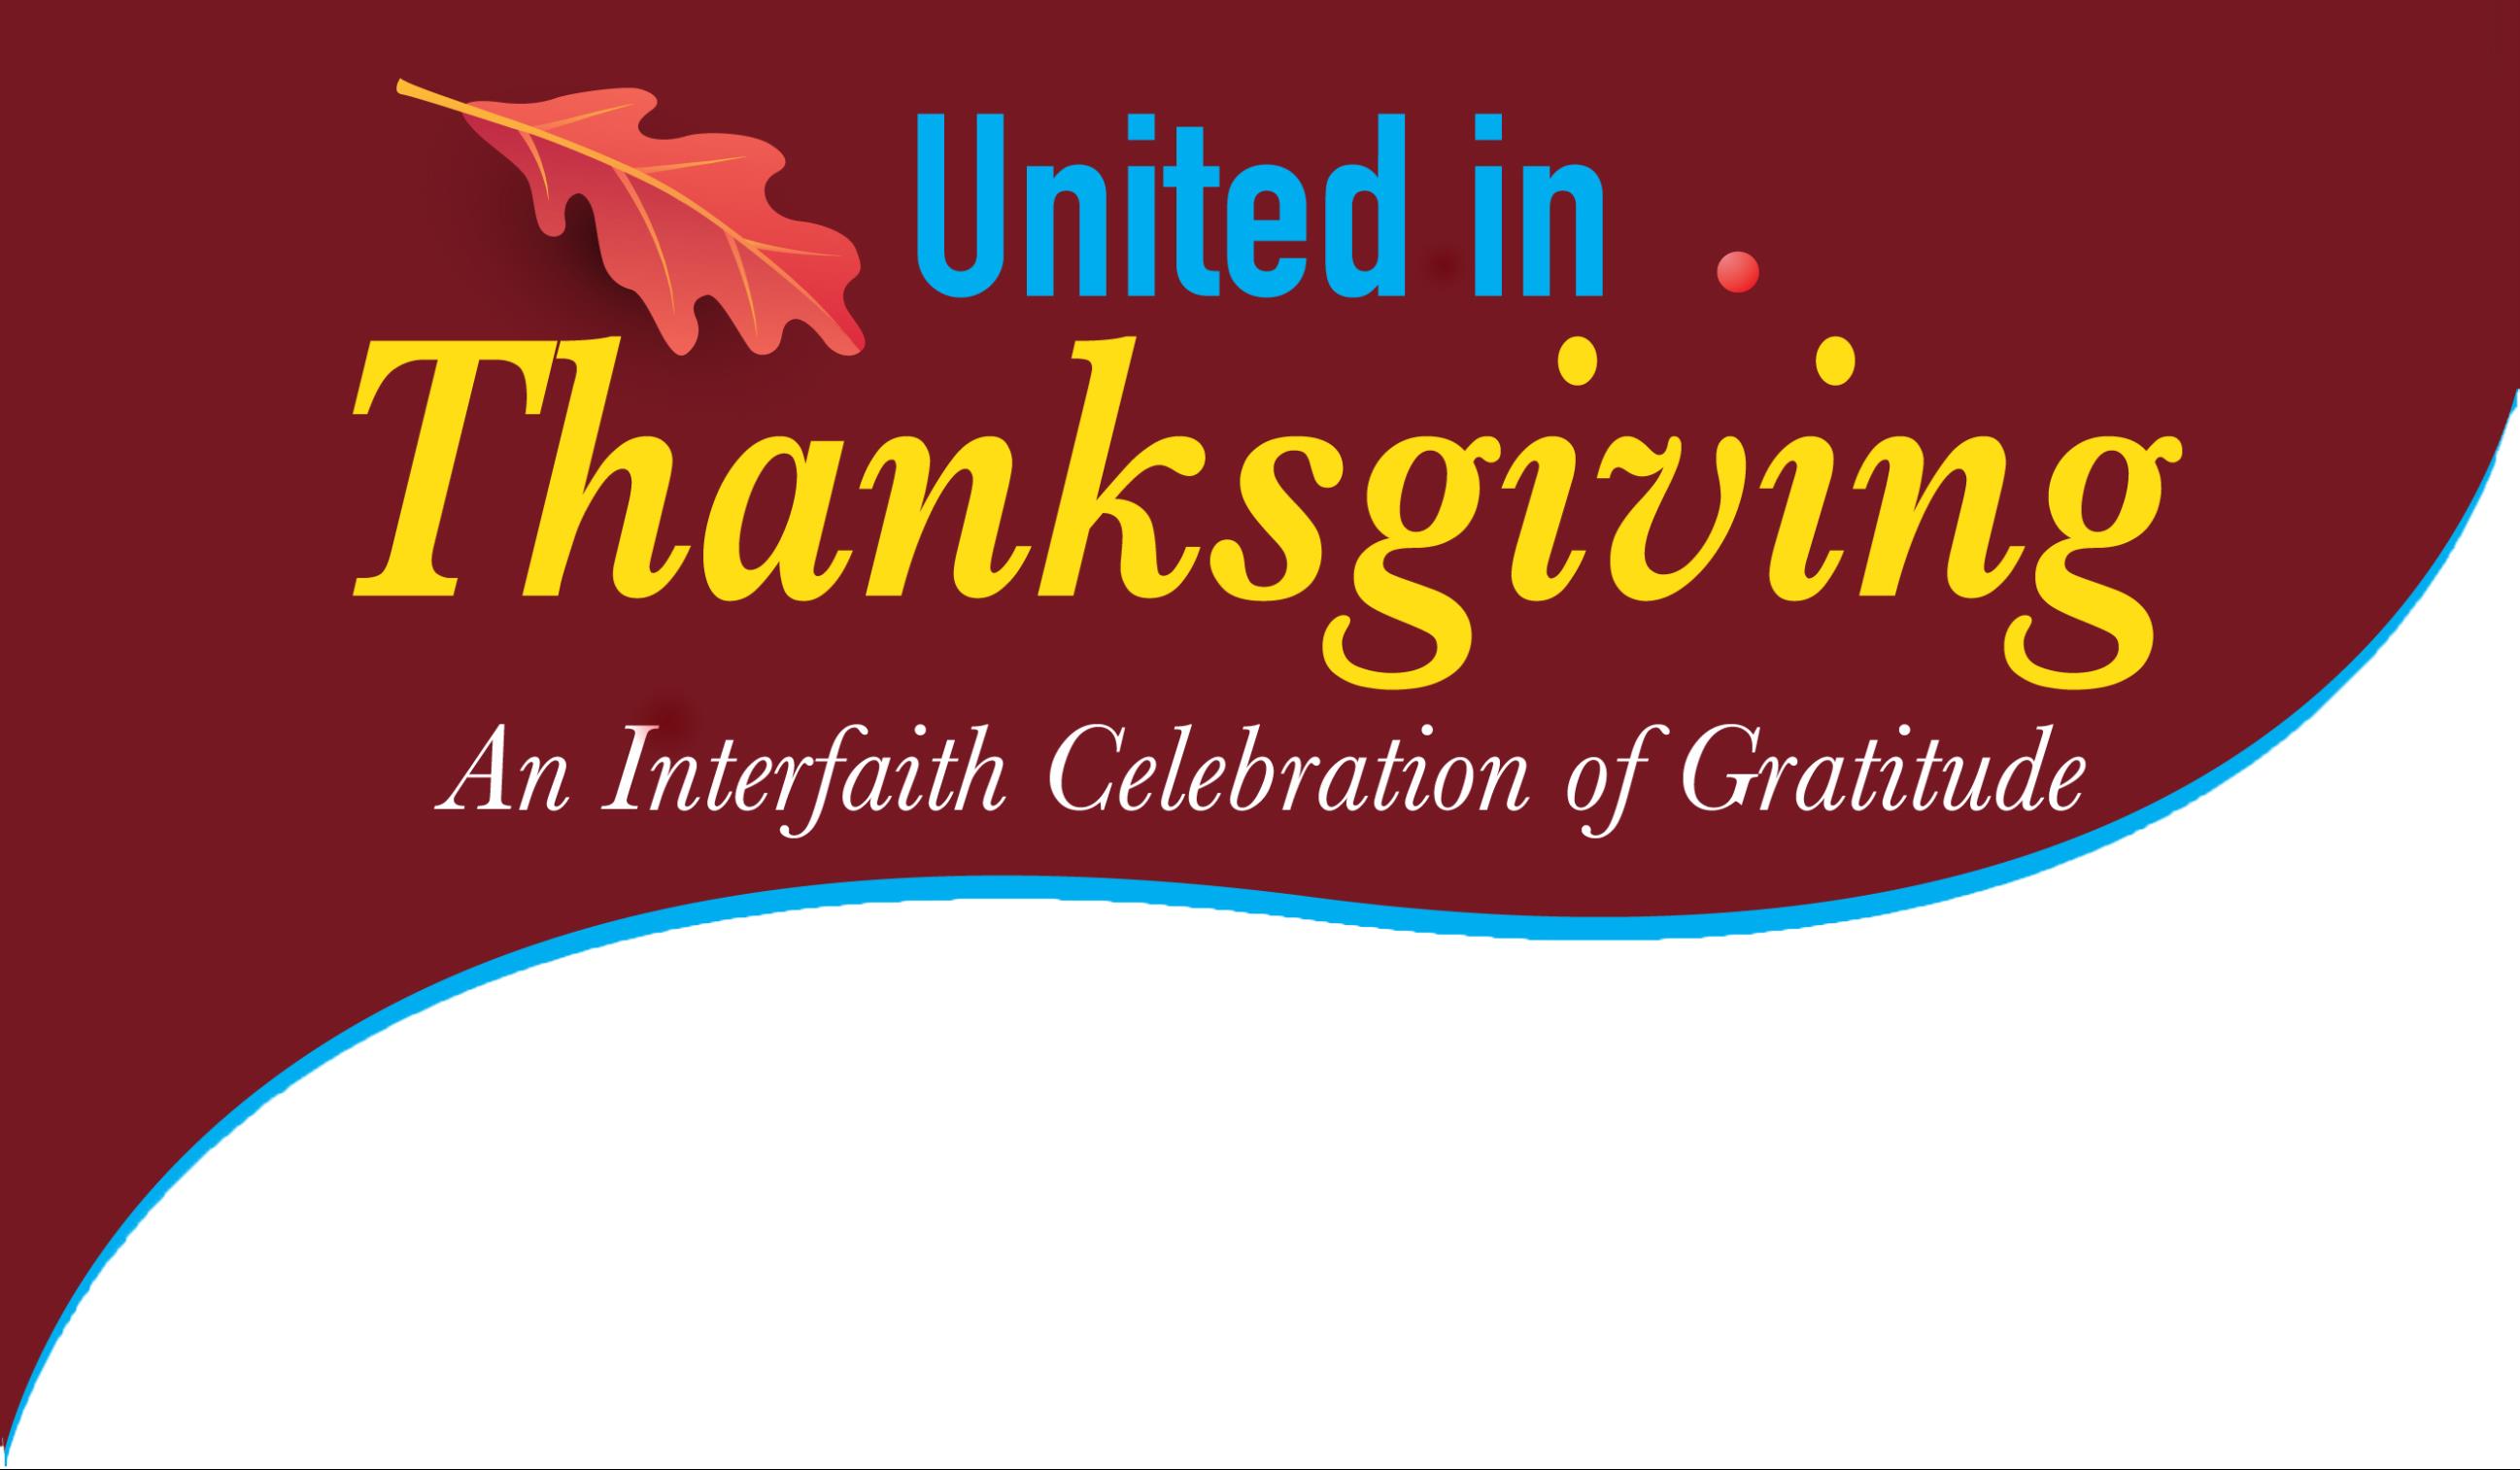 Different Faiths 'United in Thanksgiving'